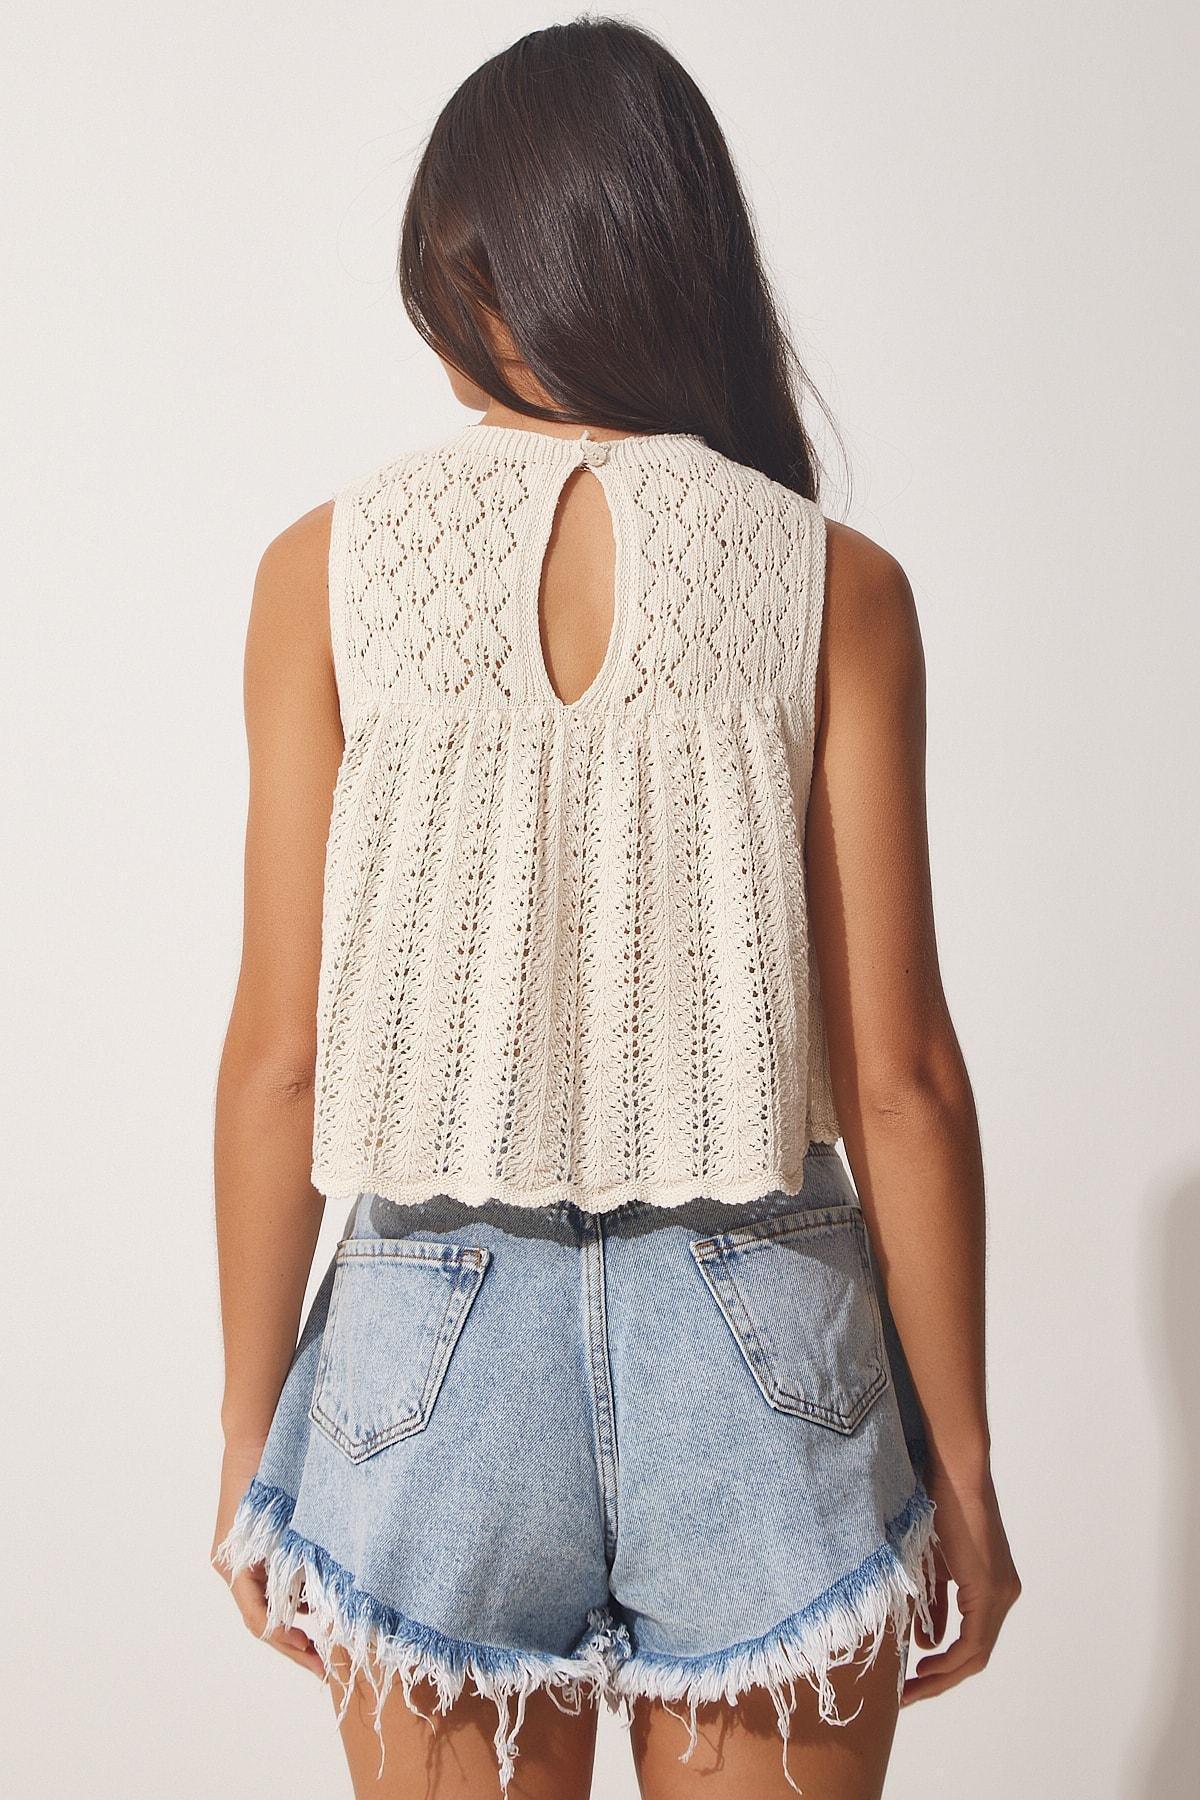 Happiness Istanbul - Cream Openwork Crop Knitwear Blouse